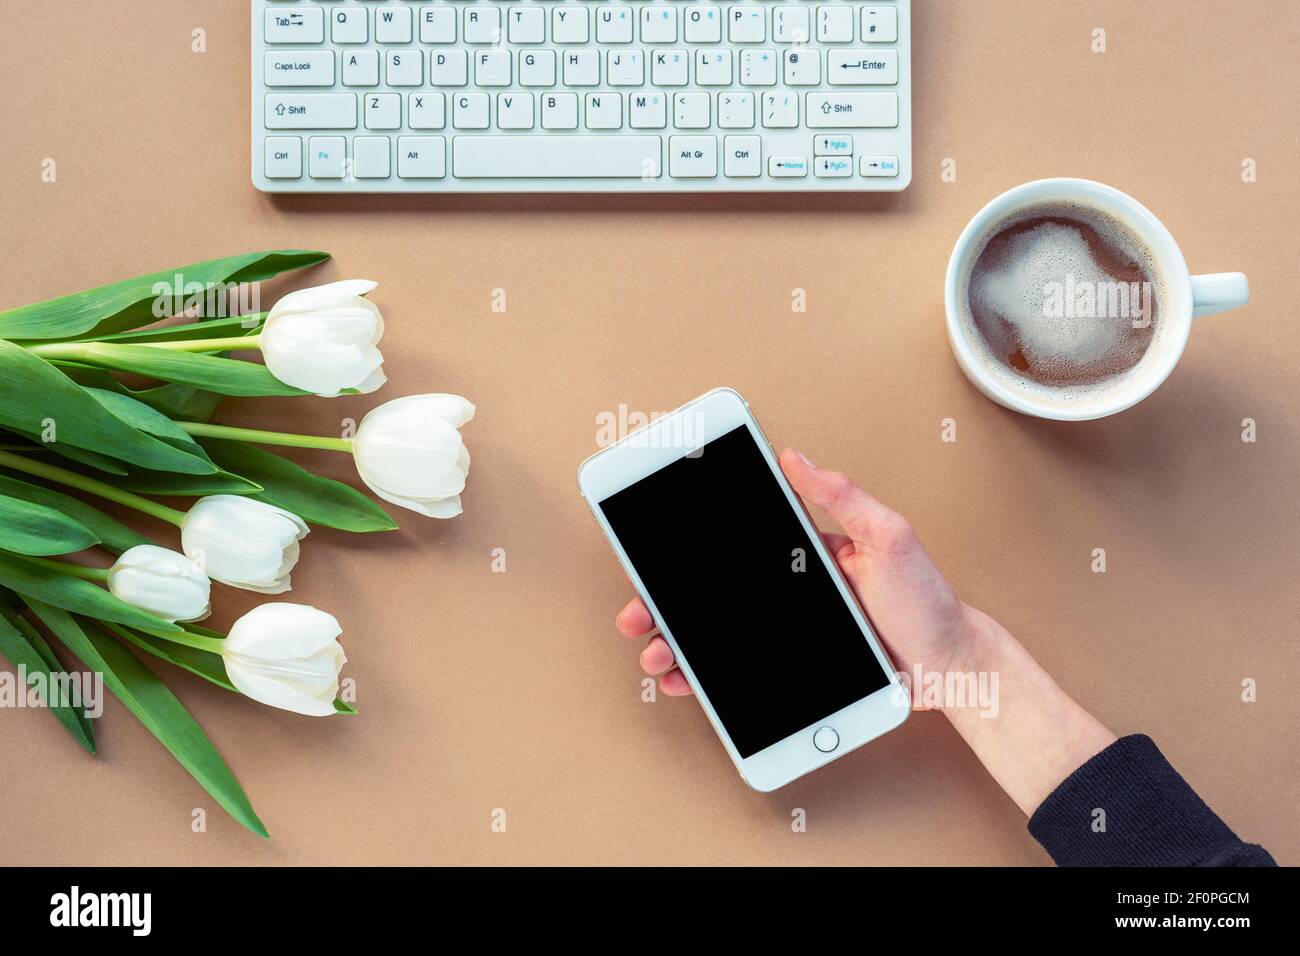 Workplace with coffee cup, hand holding a phone, computer keyboard and white tulips. Brown background. Women's day or Mother's day concept. Top view, Stock Photo